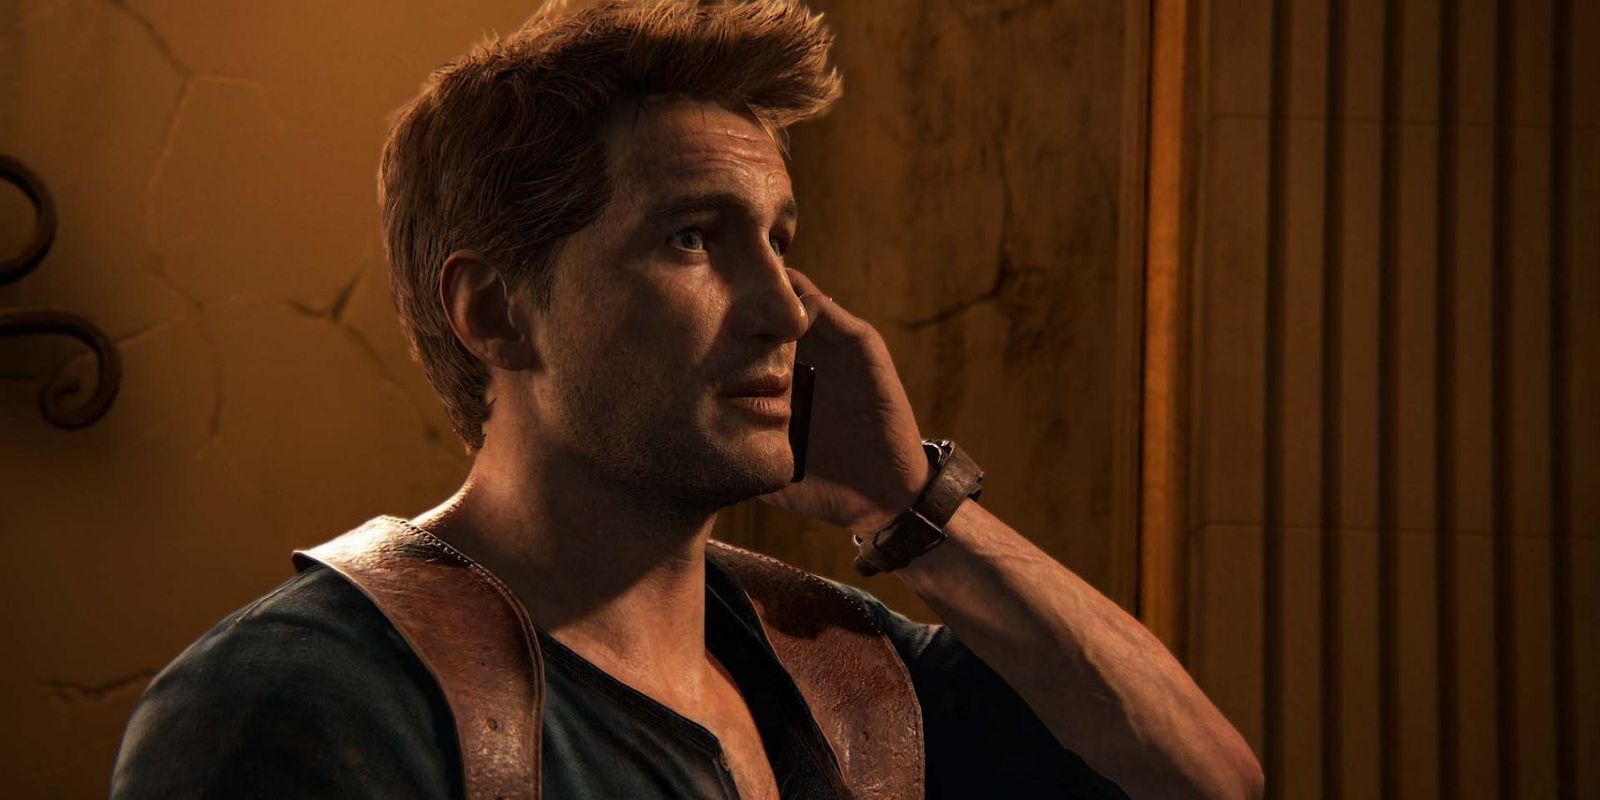 Nathan Drake on the phone in Uncharted 4 A Thief's End.